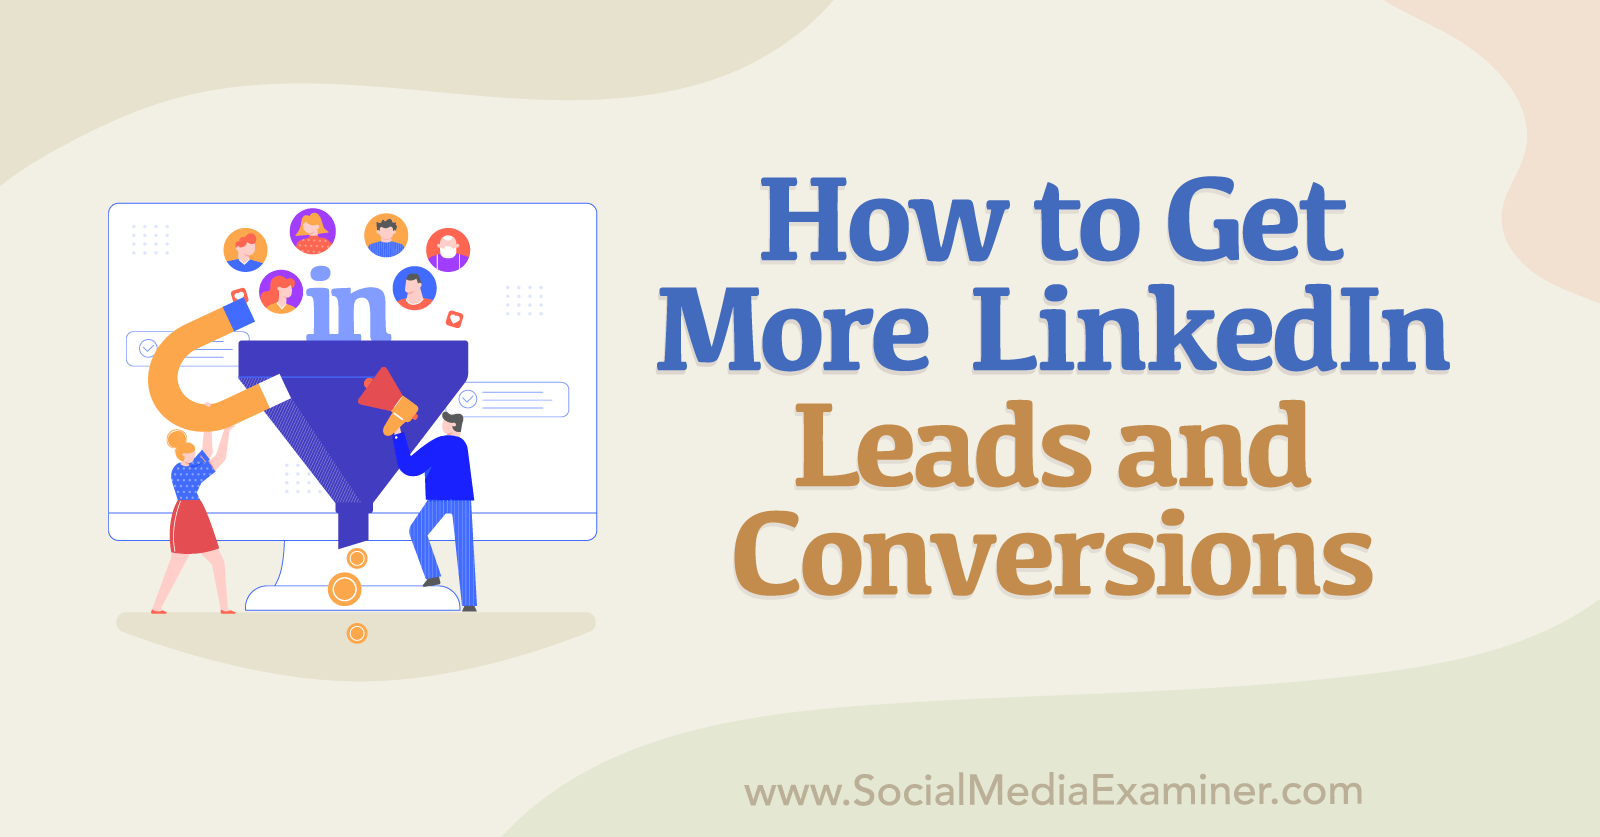 How to Get More LinkedIn Leads and Conversions by Anna Sonnenberg